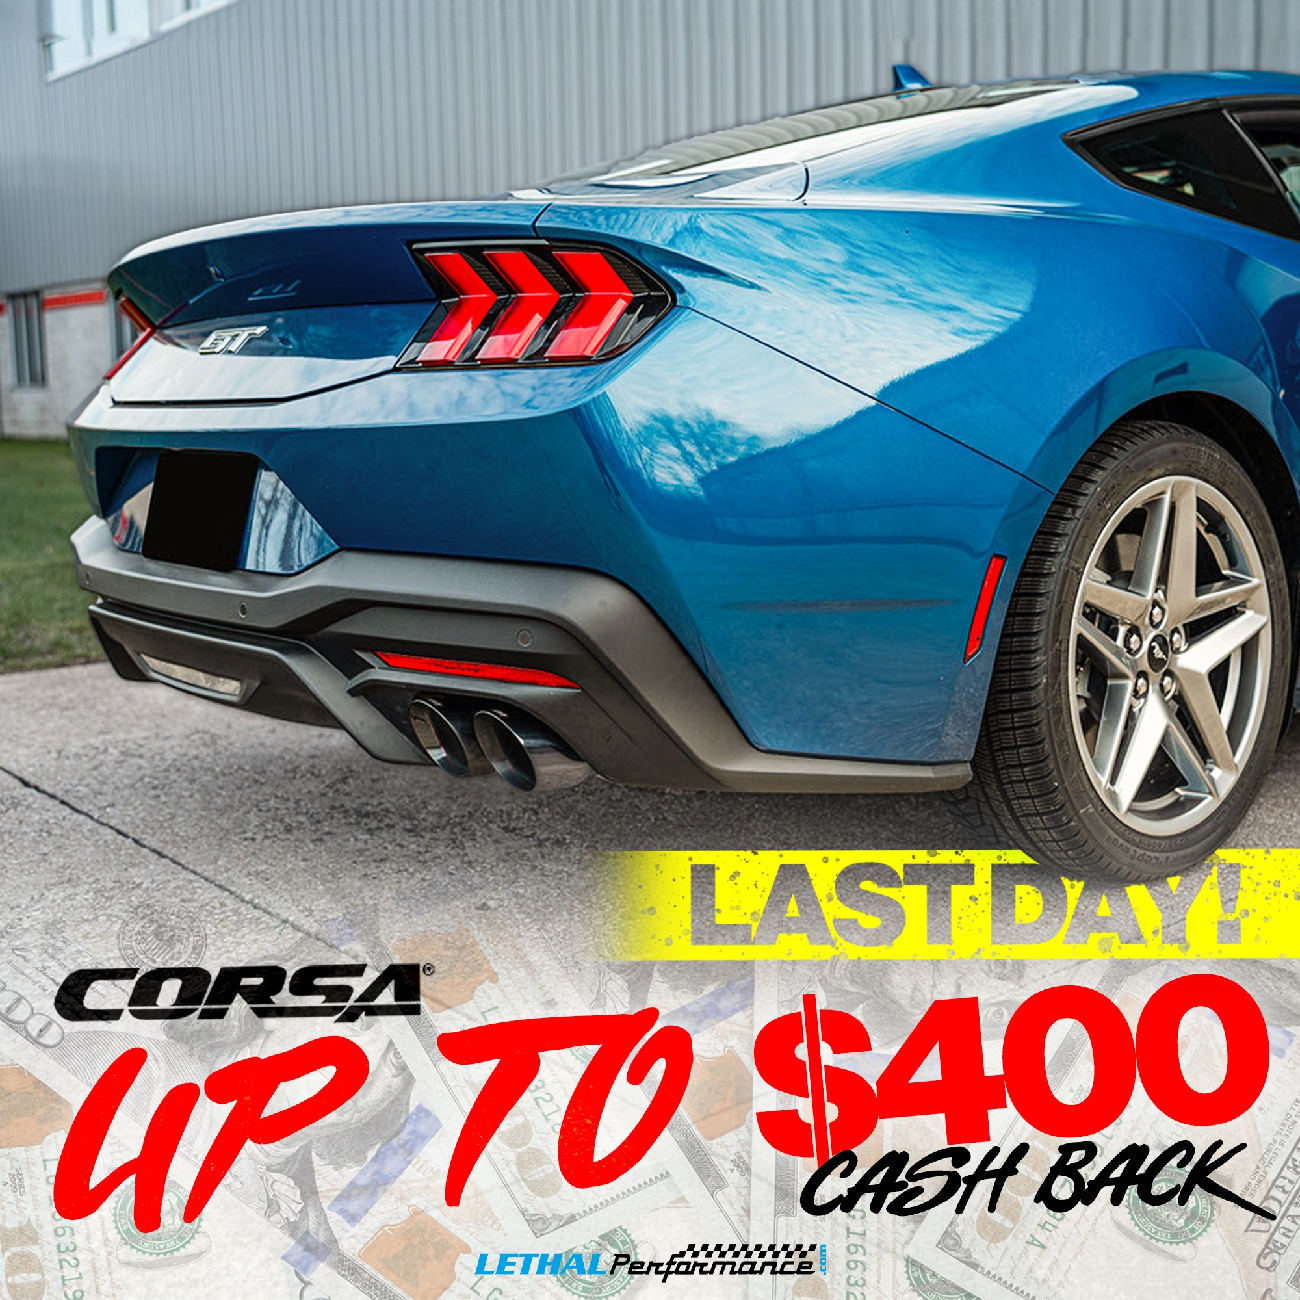 S650 Mustang Corsa Rebate Ending Soon - Don't Miss Out! corsa feb 2024 s650